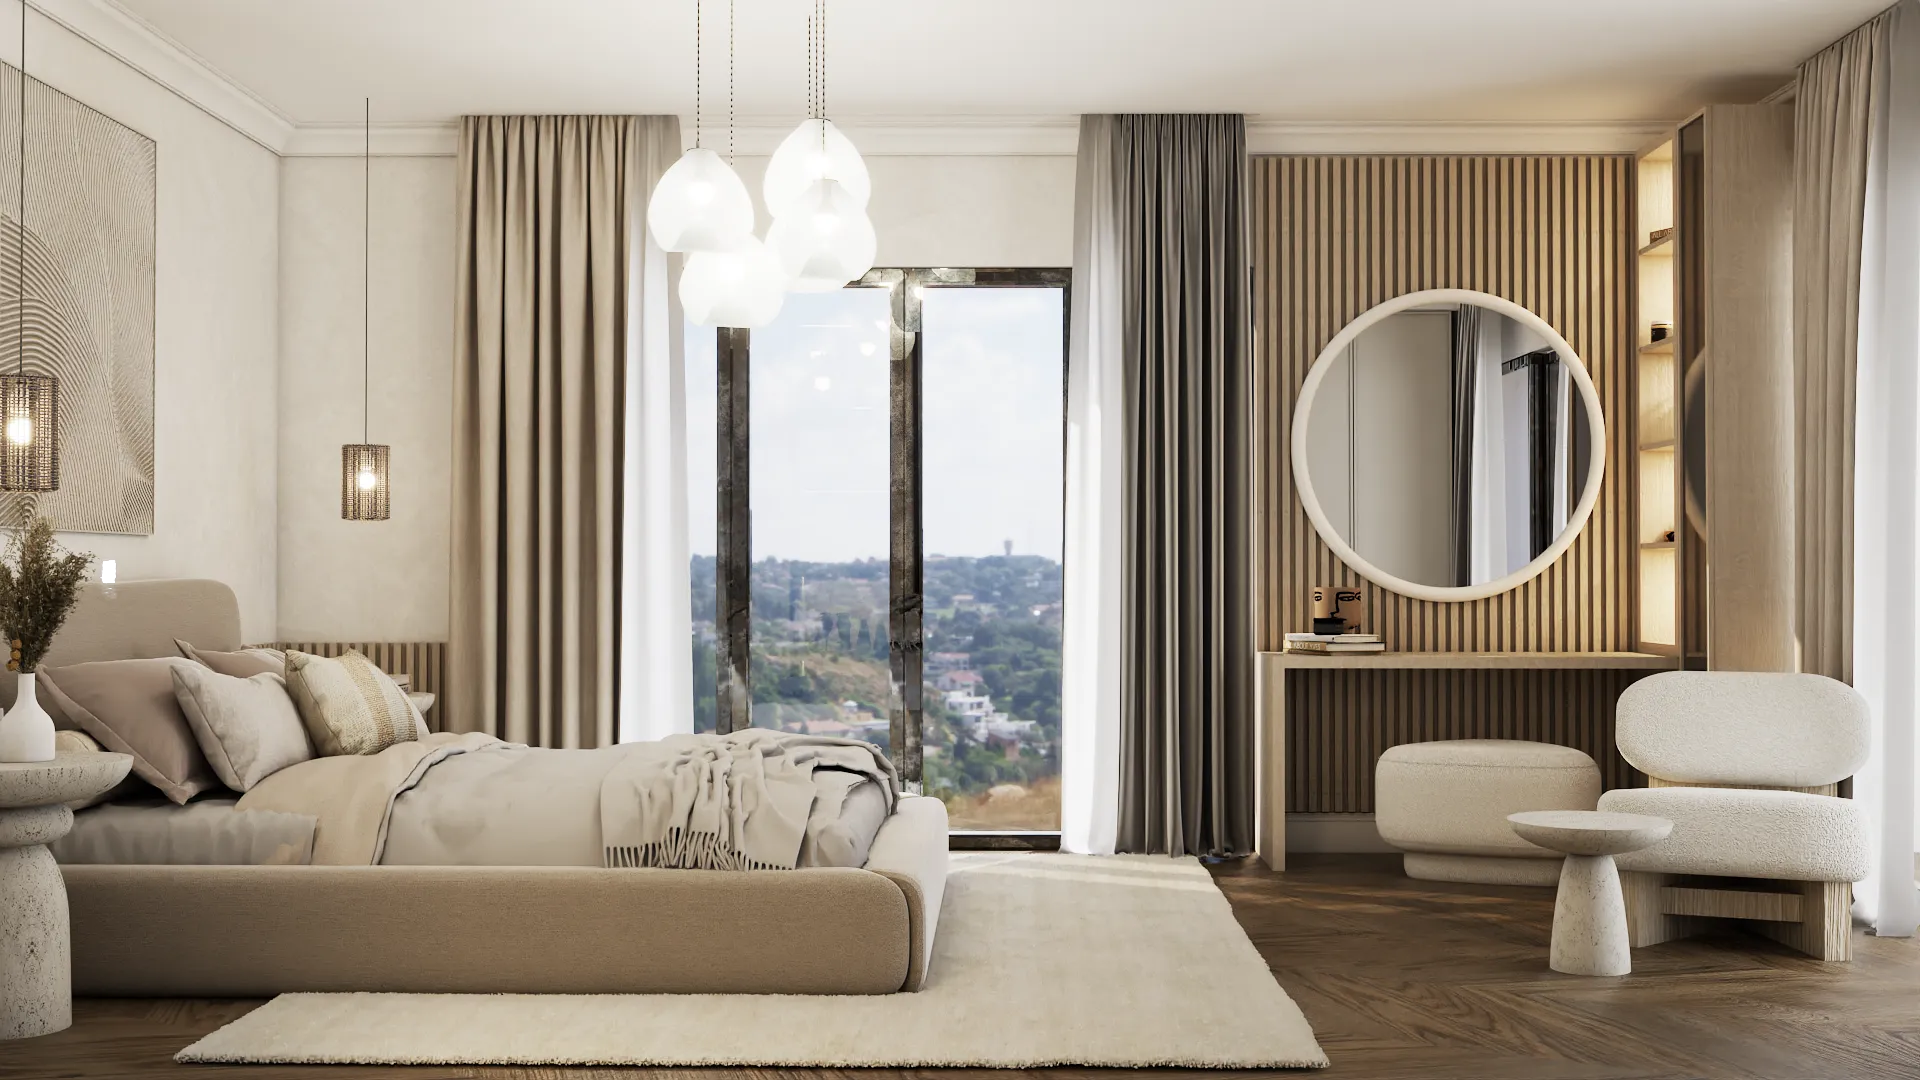 Luxurious bedroom with expansive panoramic views, elegant decor, and contemporary furnishings, providing a serene urban escape. Design by Debora, an online interior design service.